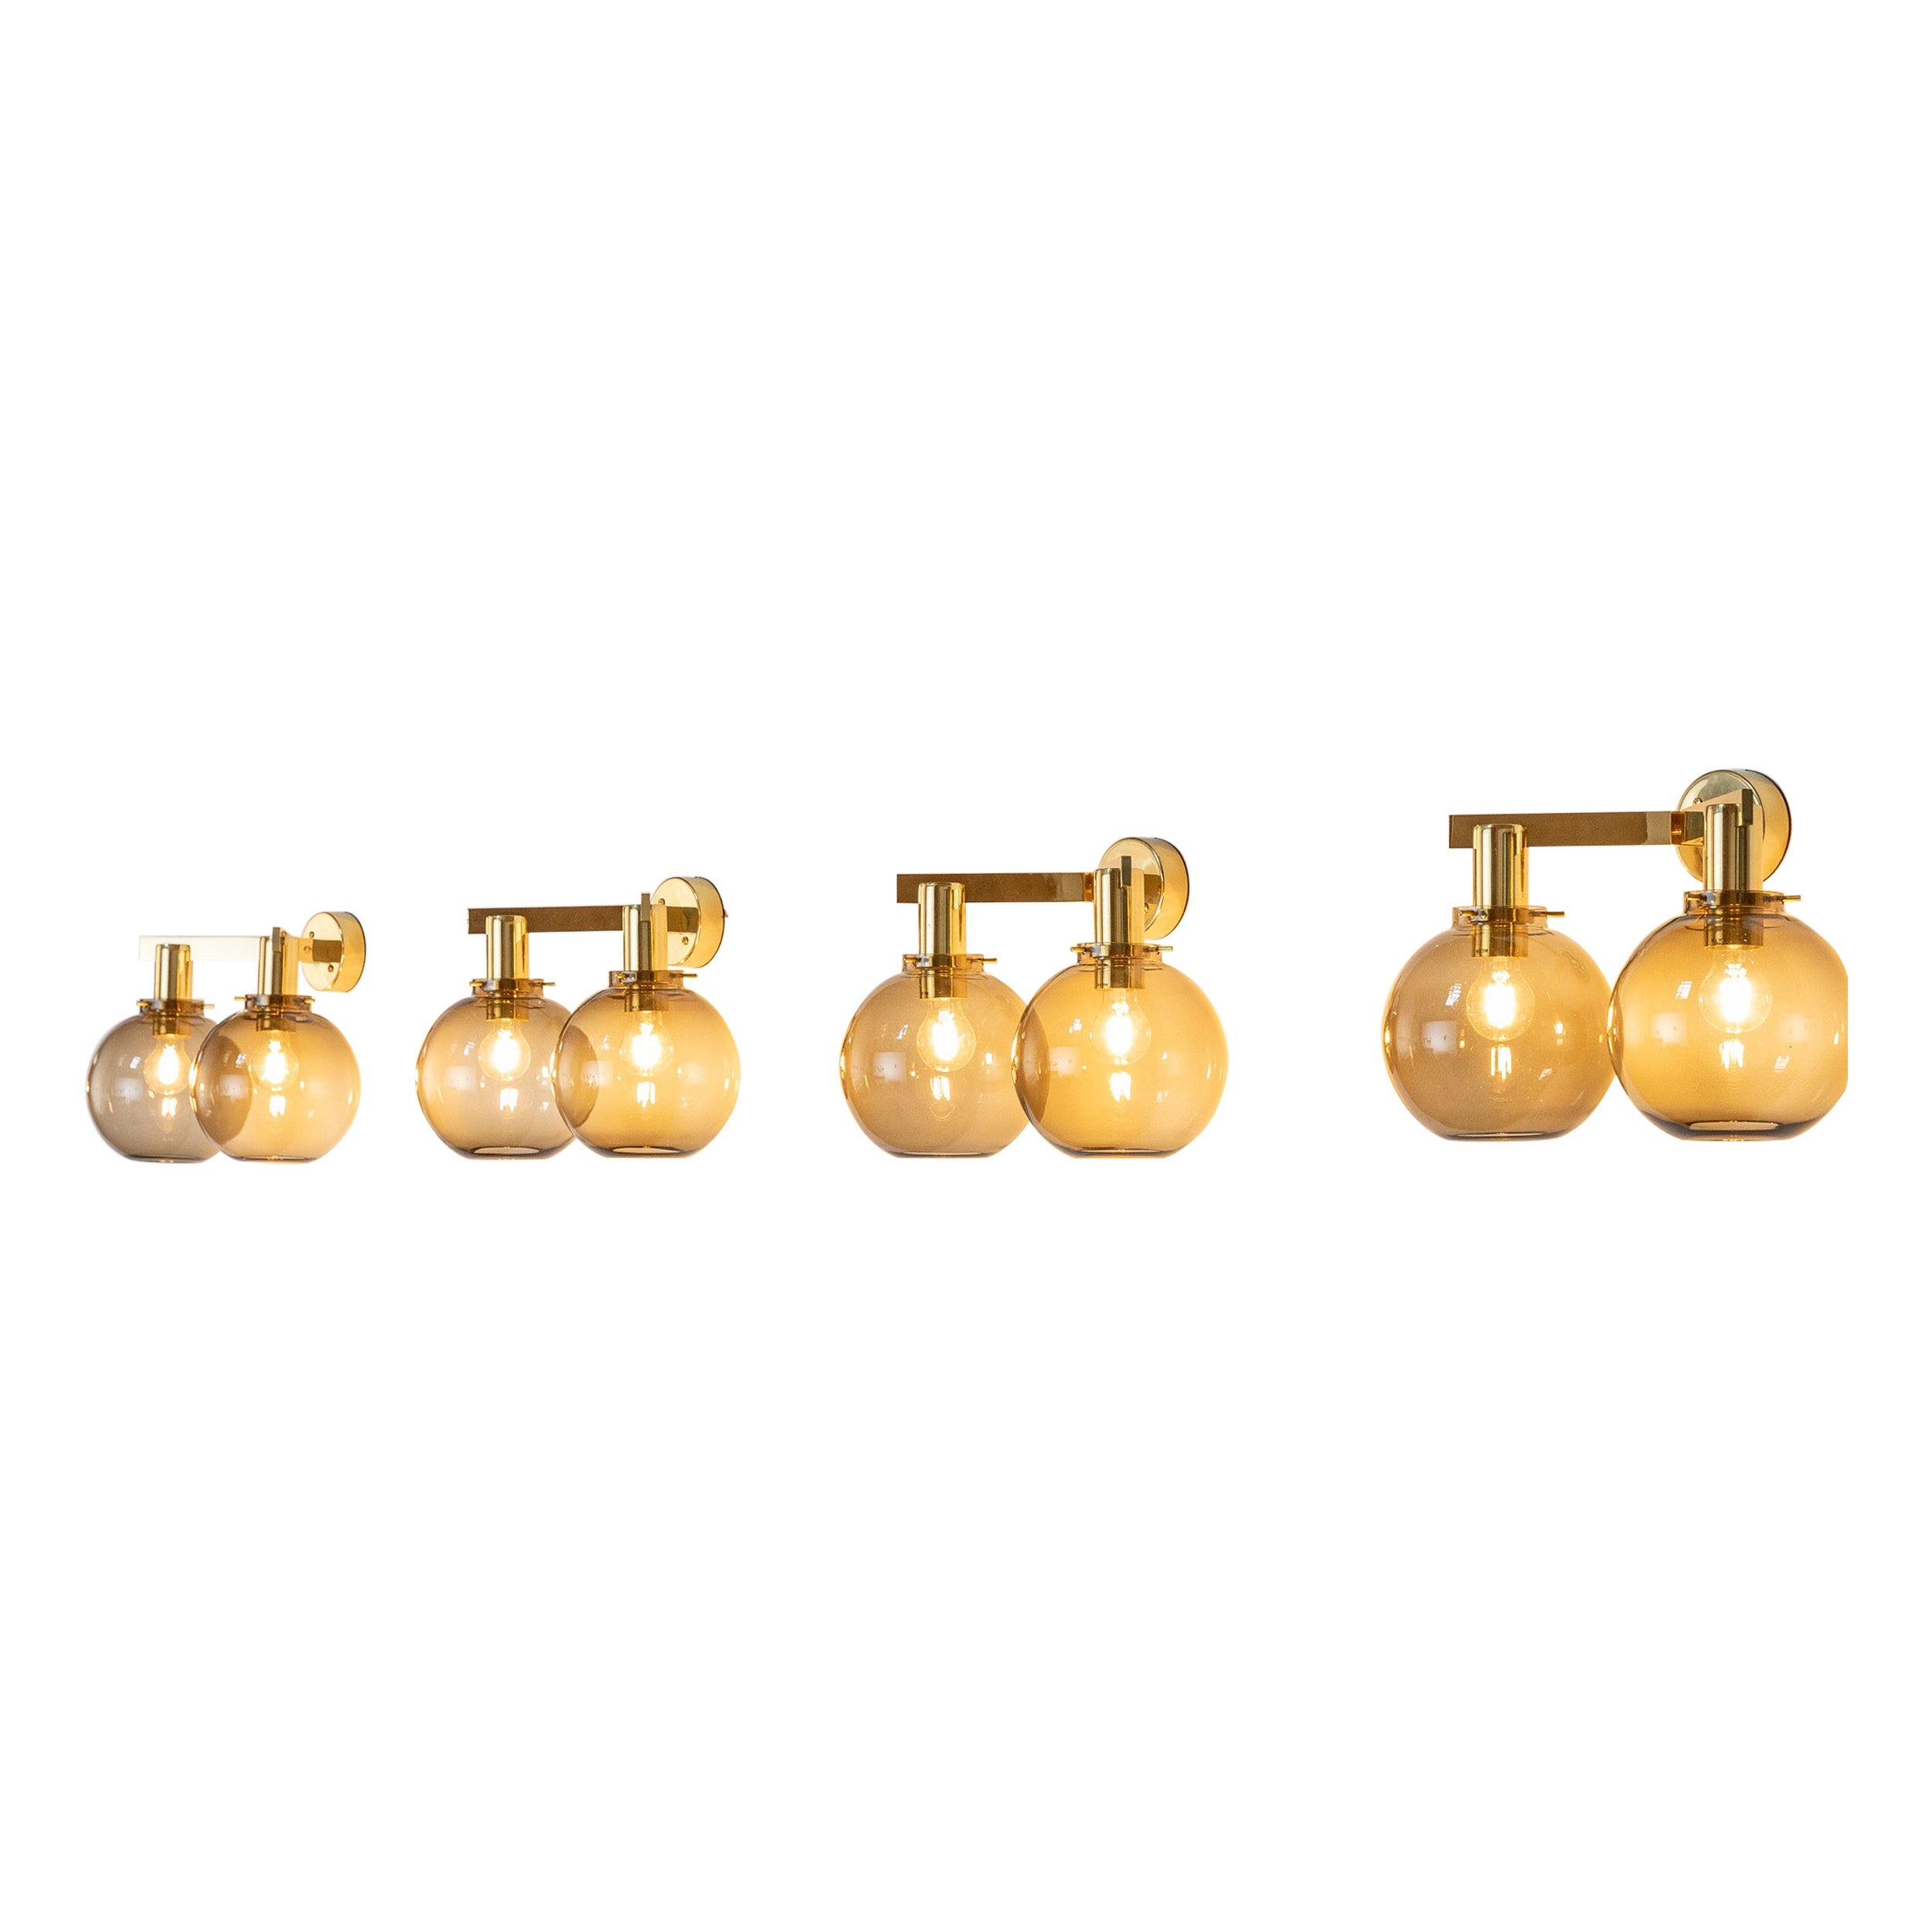 Midcentury set of 4 sconces by Hans-Agne Jakobsson